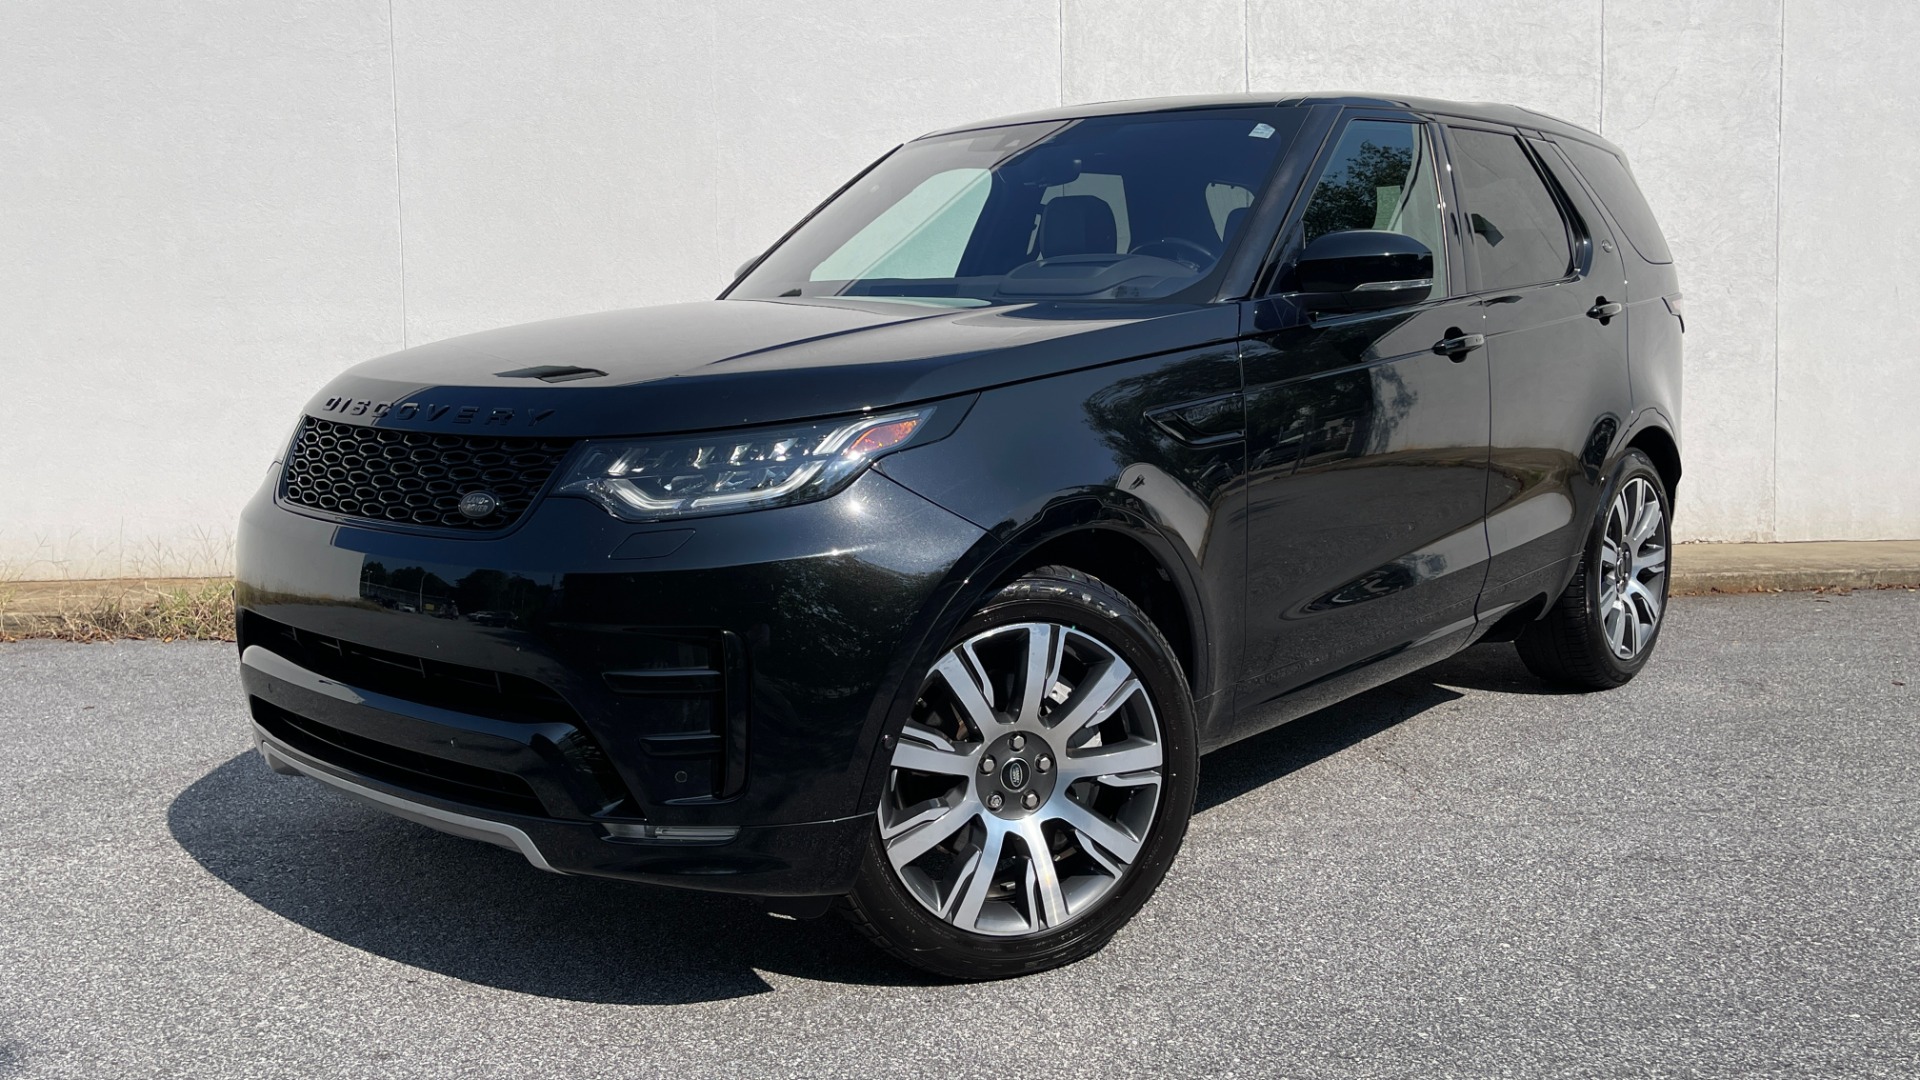 Used 2019 Land Rover Discovery HSE / SEVEN SEAT / DYNAMIC PACKAGE / 21IN WHEELS / REMOTE SEAT PACKAGE for sale $46,495 at Formula Imports in Charlotte NC 28227 1